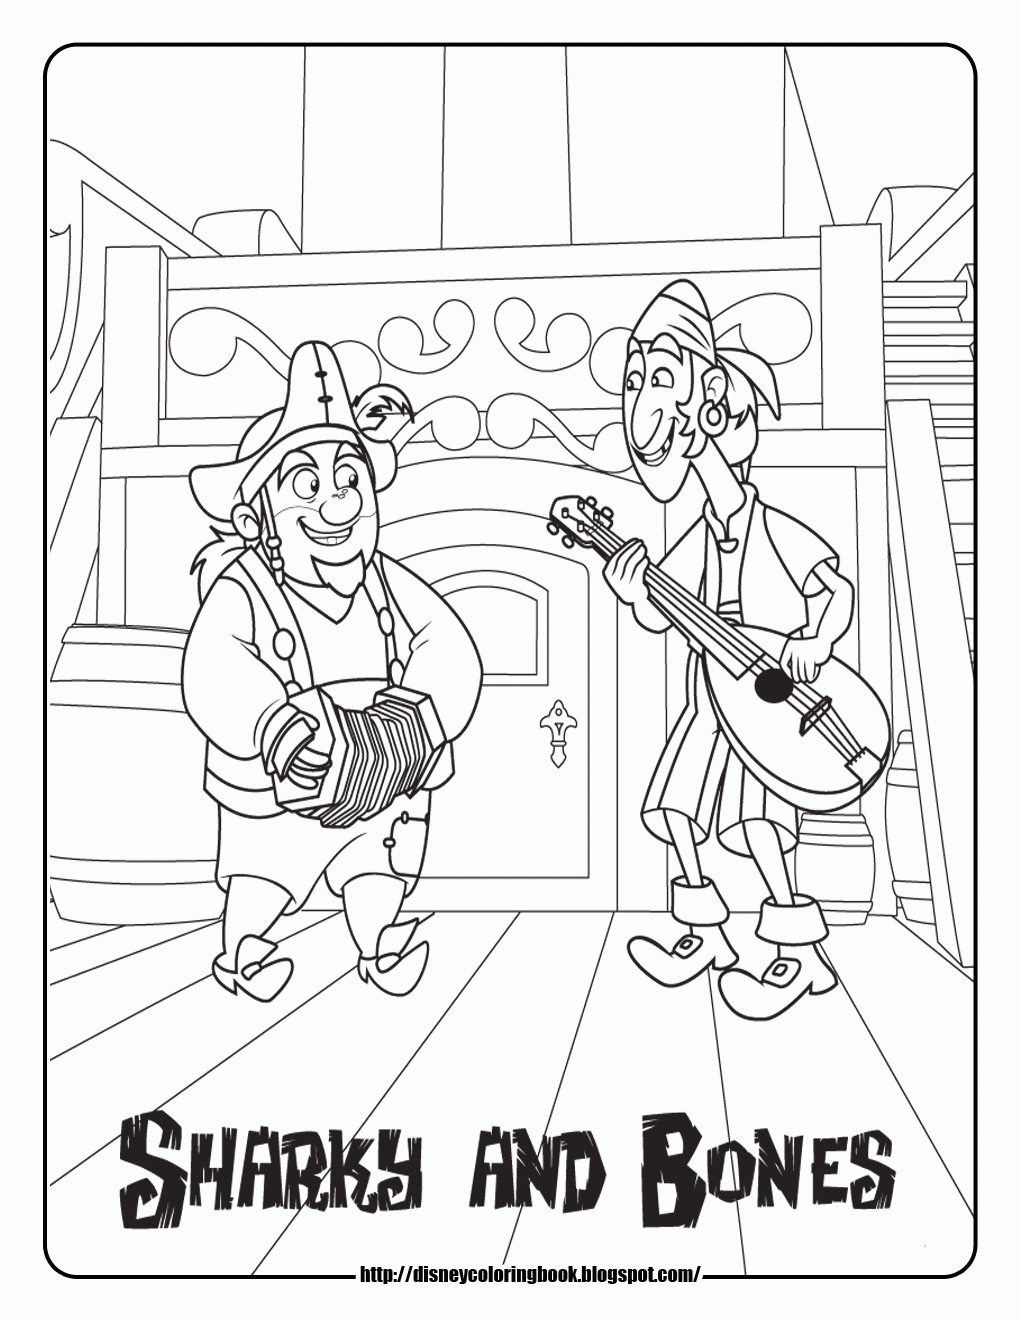 Disney Coloring Pages and Sheets for Kids: Jake and the Neverland ...